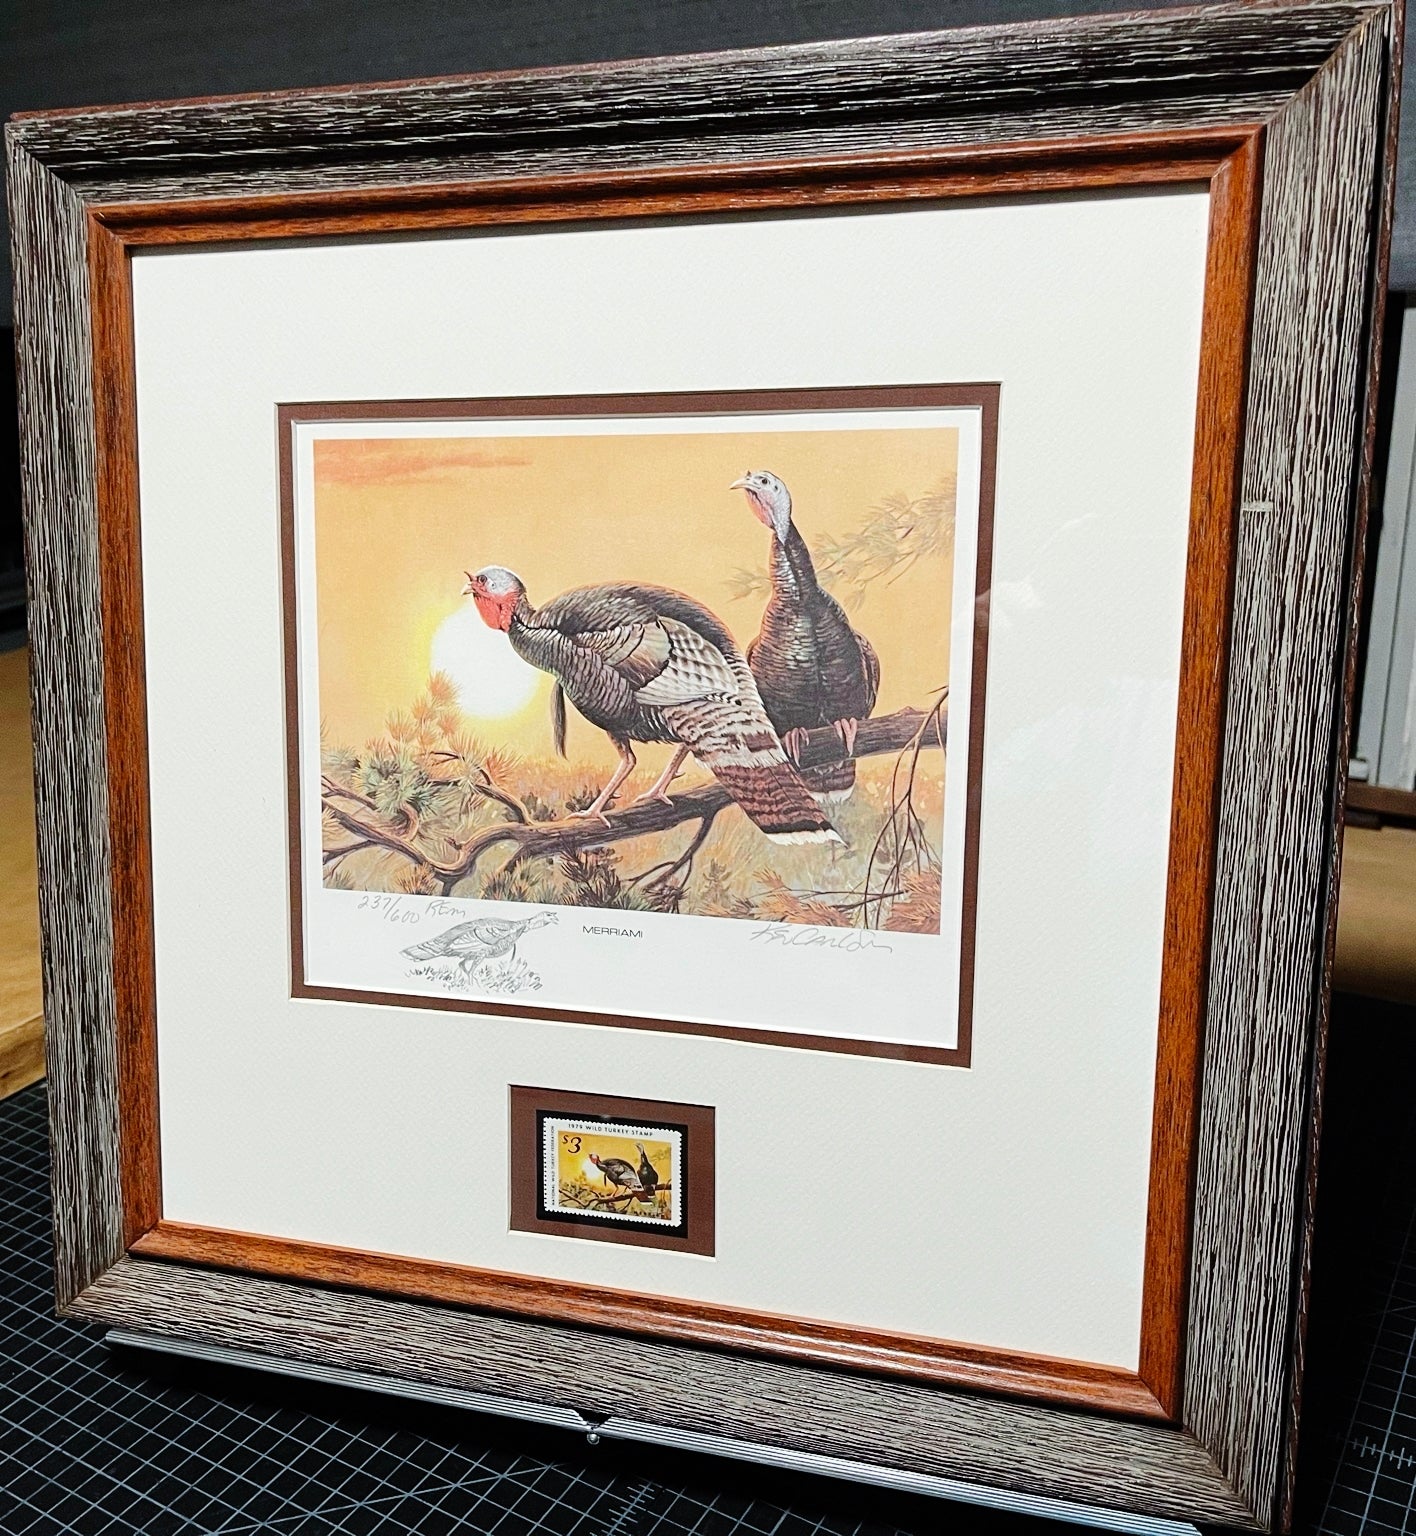 Ken Carlson - 1979 National Wild Turkey Federation Stamp Print With Stamp & Remarque - Brand New Custom Sporting Frame